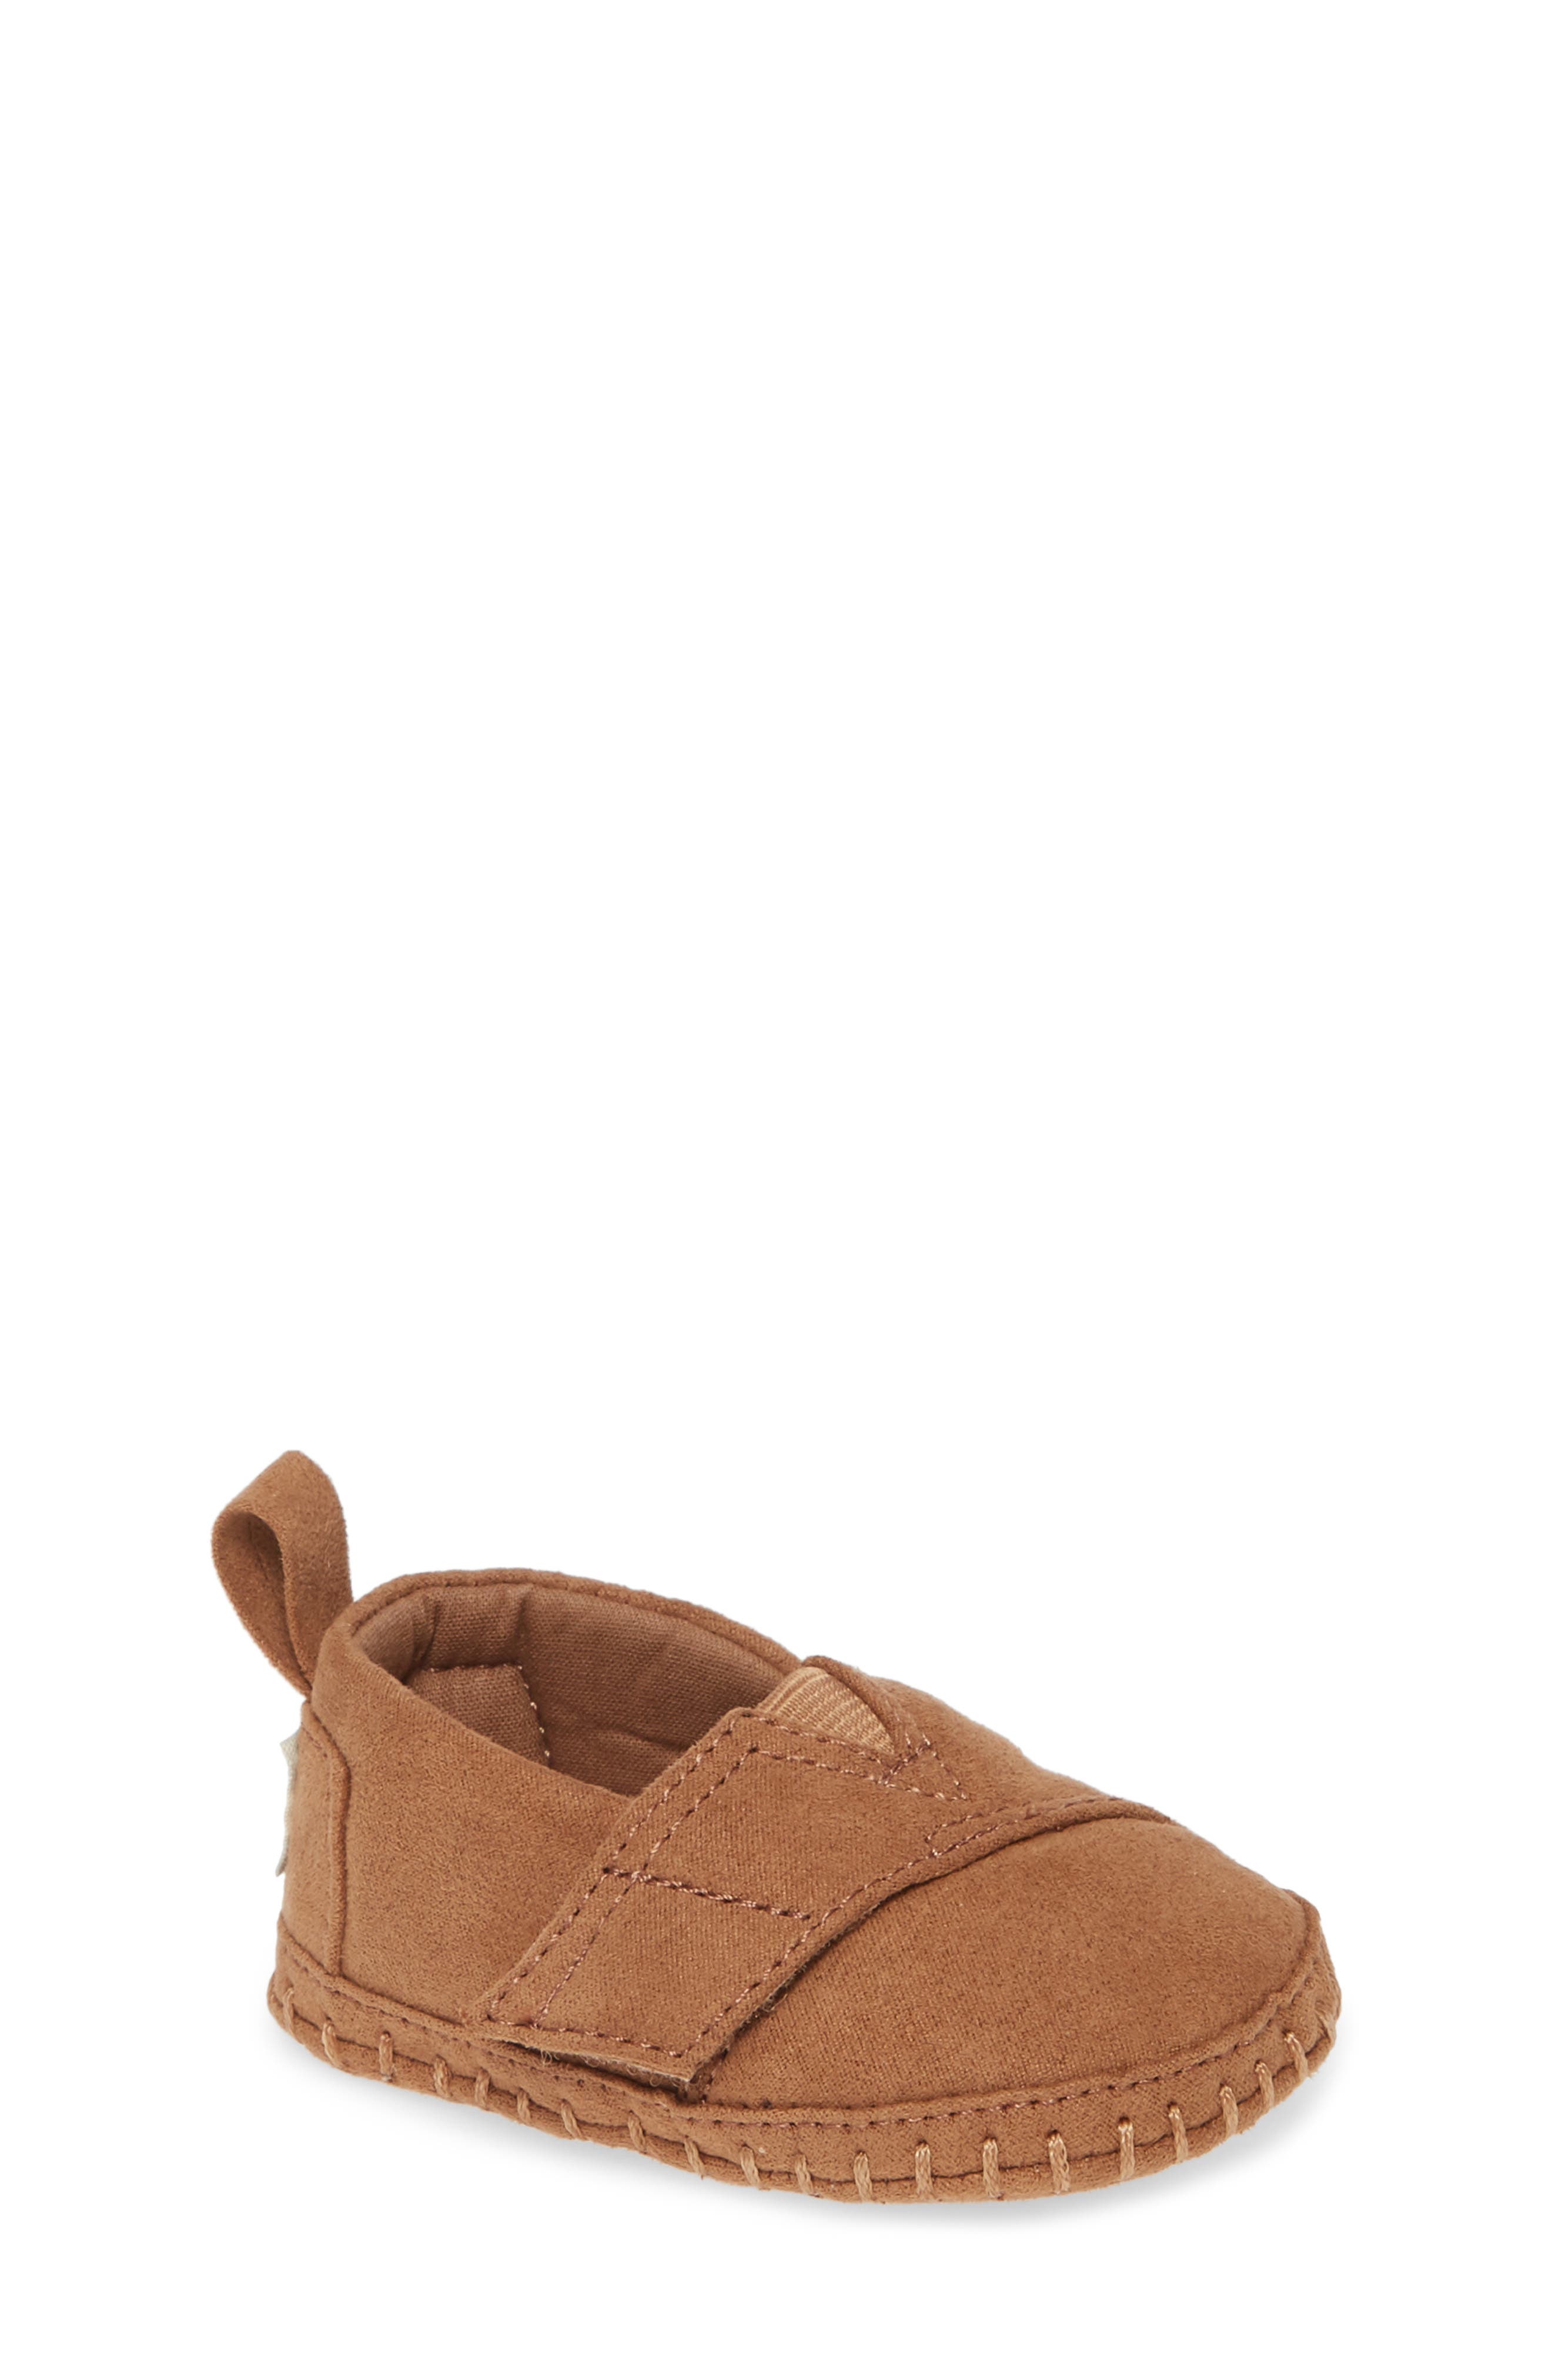 baby toms crib shoes